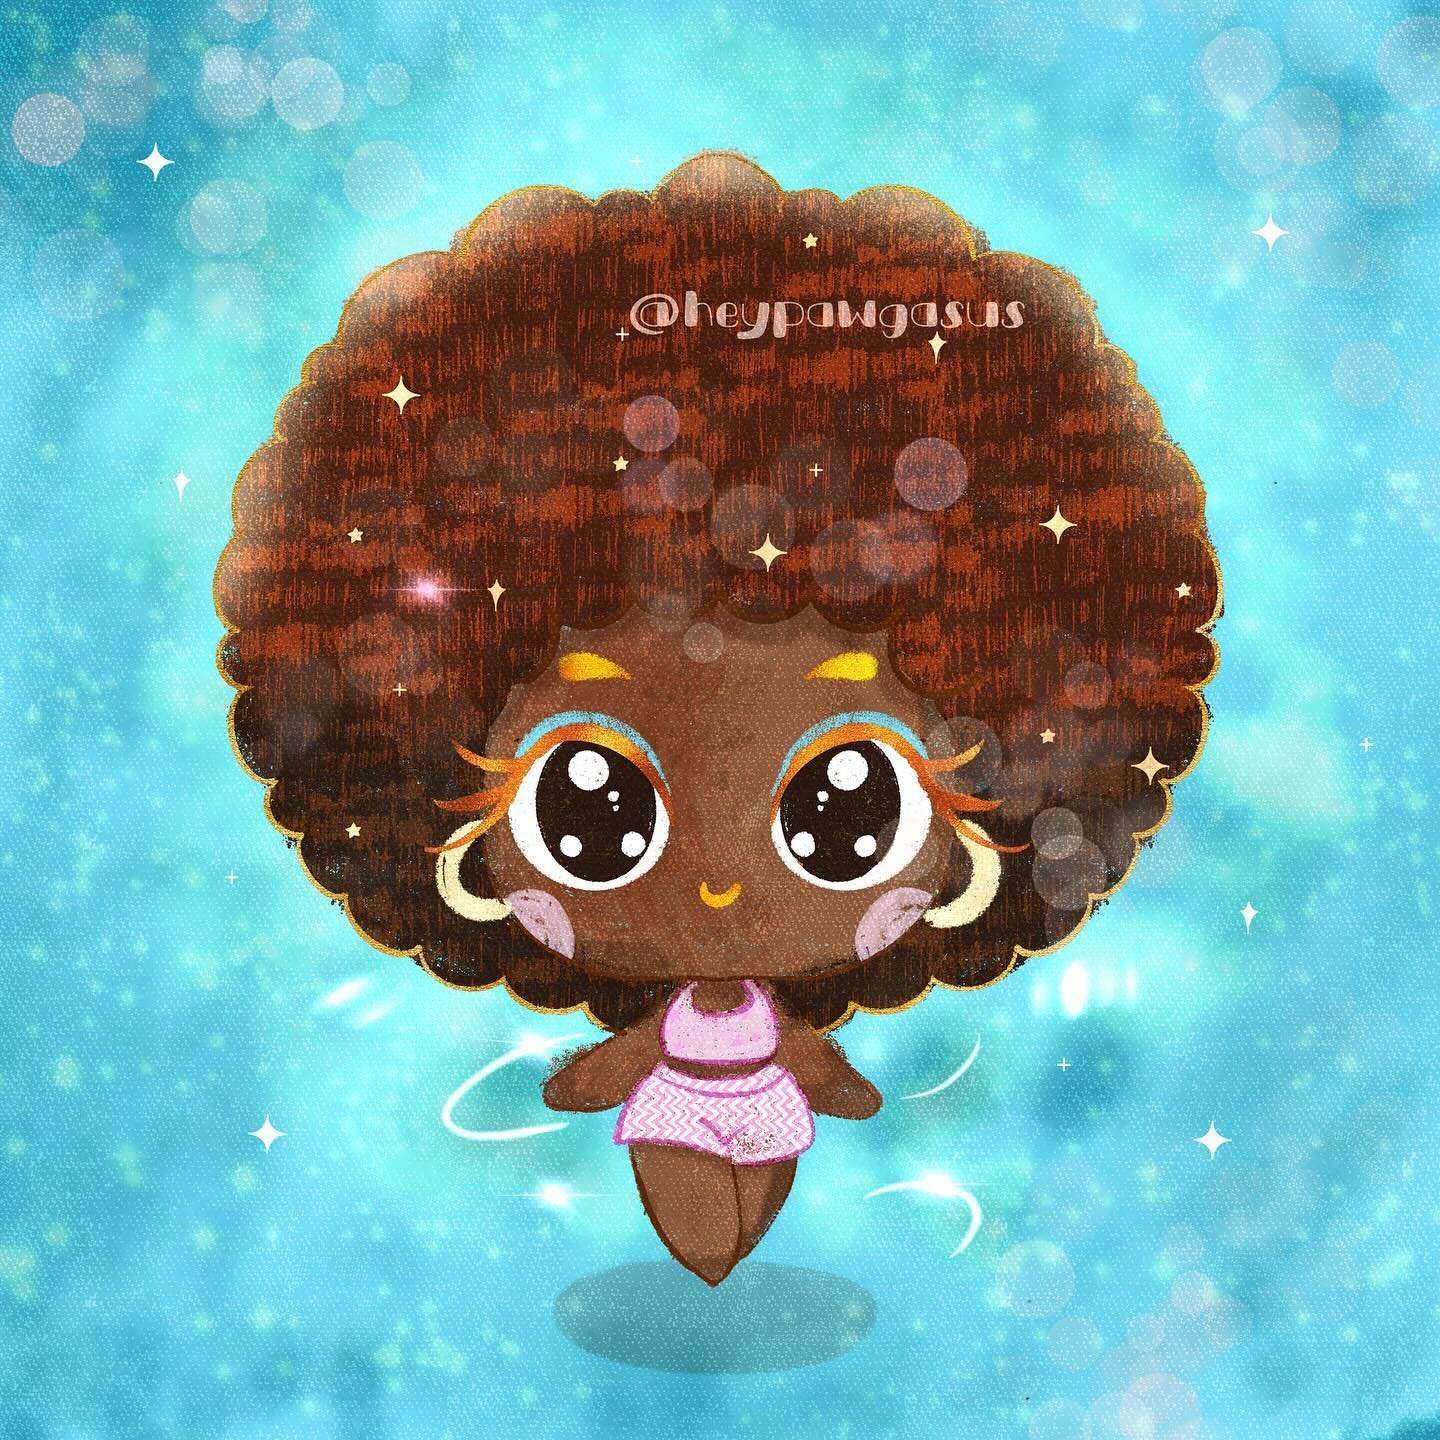 Day 4 of the #portraitparty by @charlyclements 

Today&lsquo;s prompt is
💫 afro
💫 magical
💫 eyeshadow 

#magical #portraitdrawing #portraitdrawings #cuteart #kawaiiart #artprompt #artchallenge #dailydrawing #illustration #procreateart #characterde